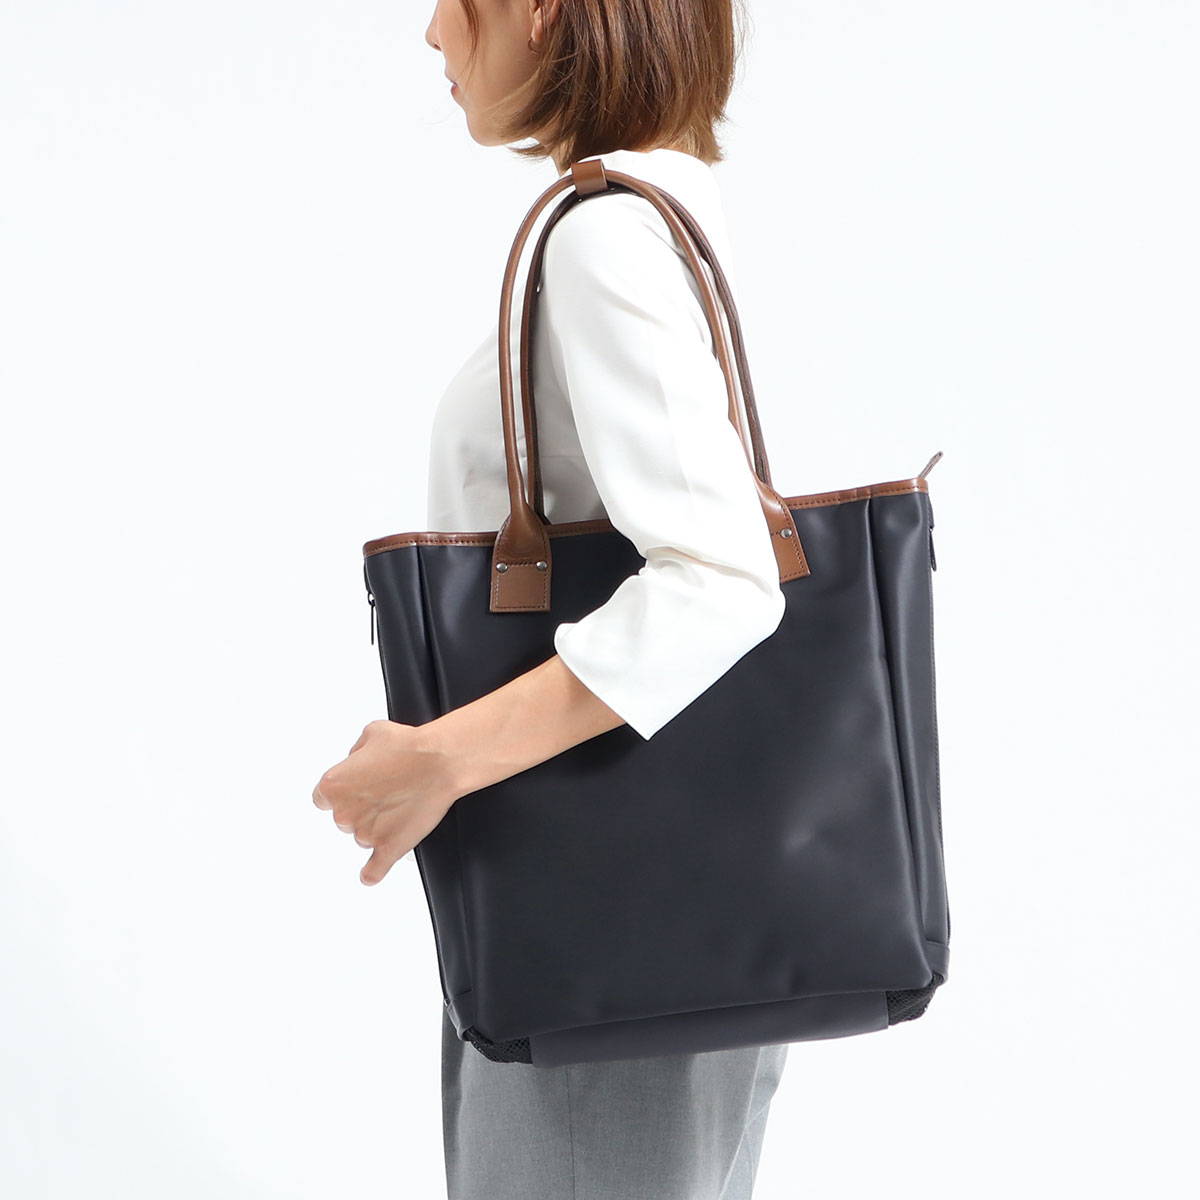 WONDER BAGGAGE ワンダーバゲージ GOODMANS CITYTIME INVISIBLE TOTE 